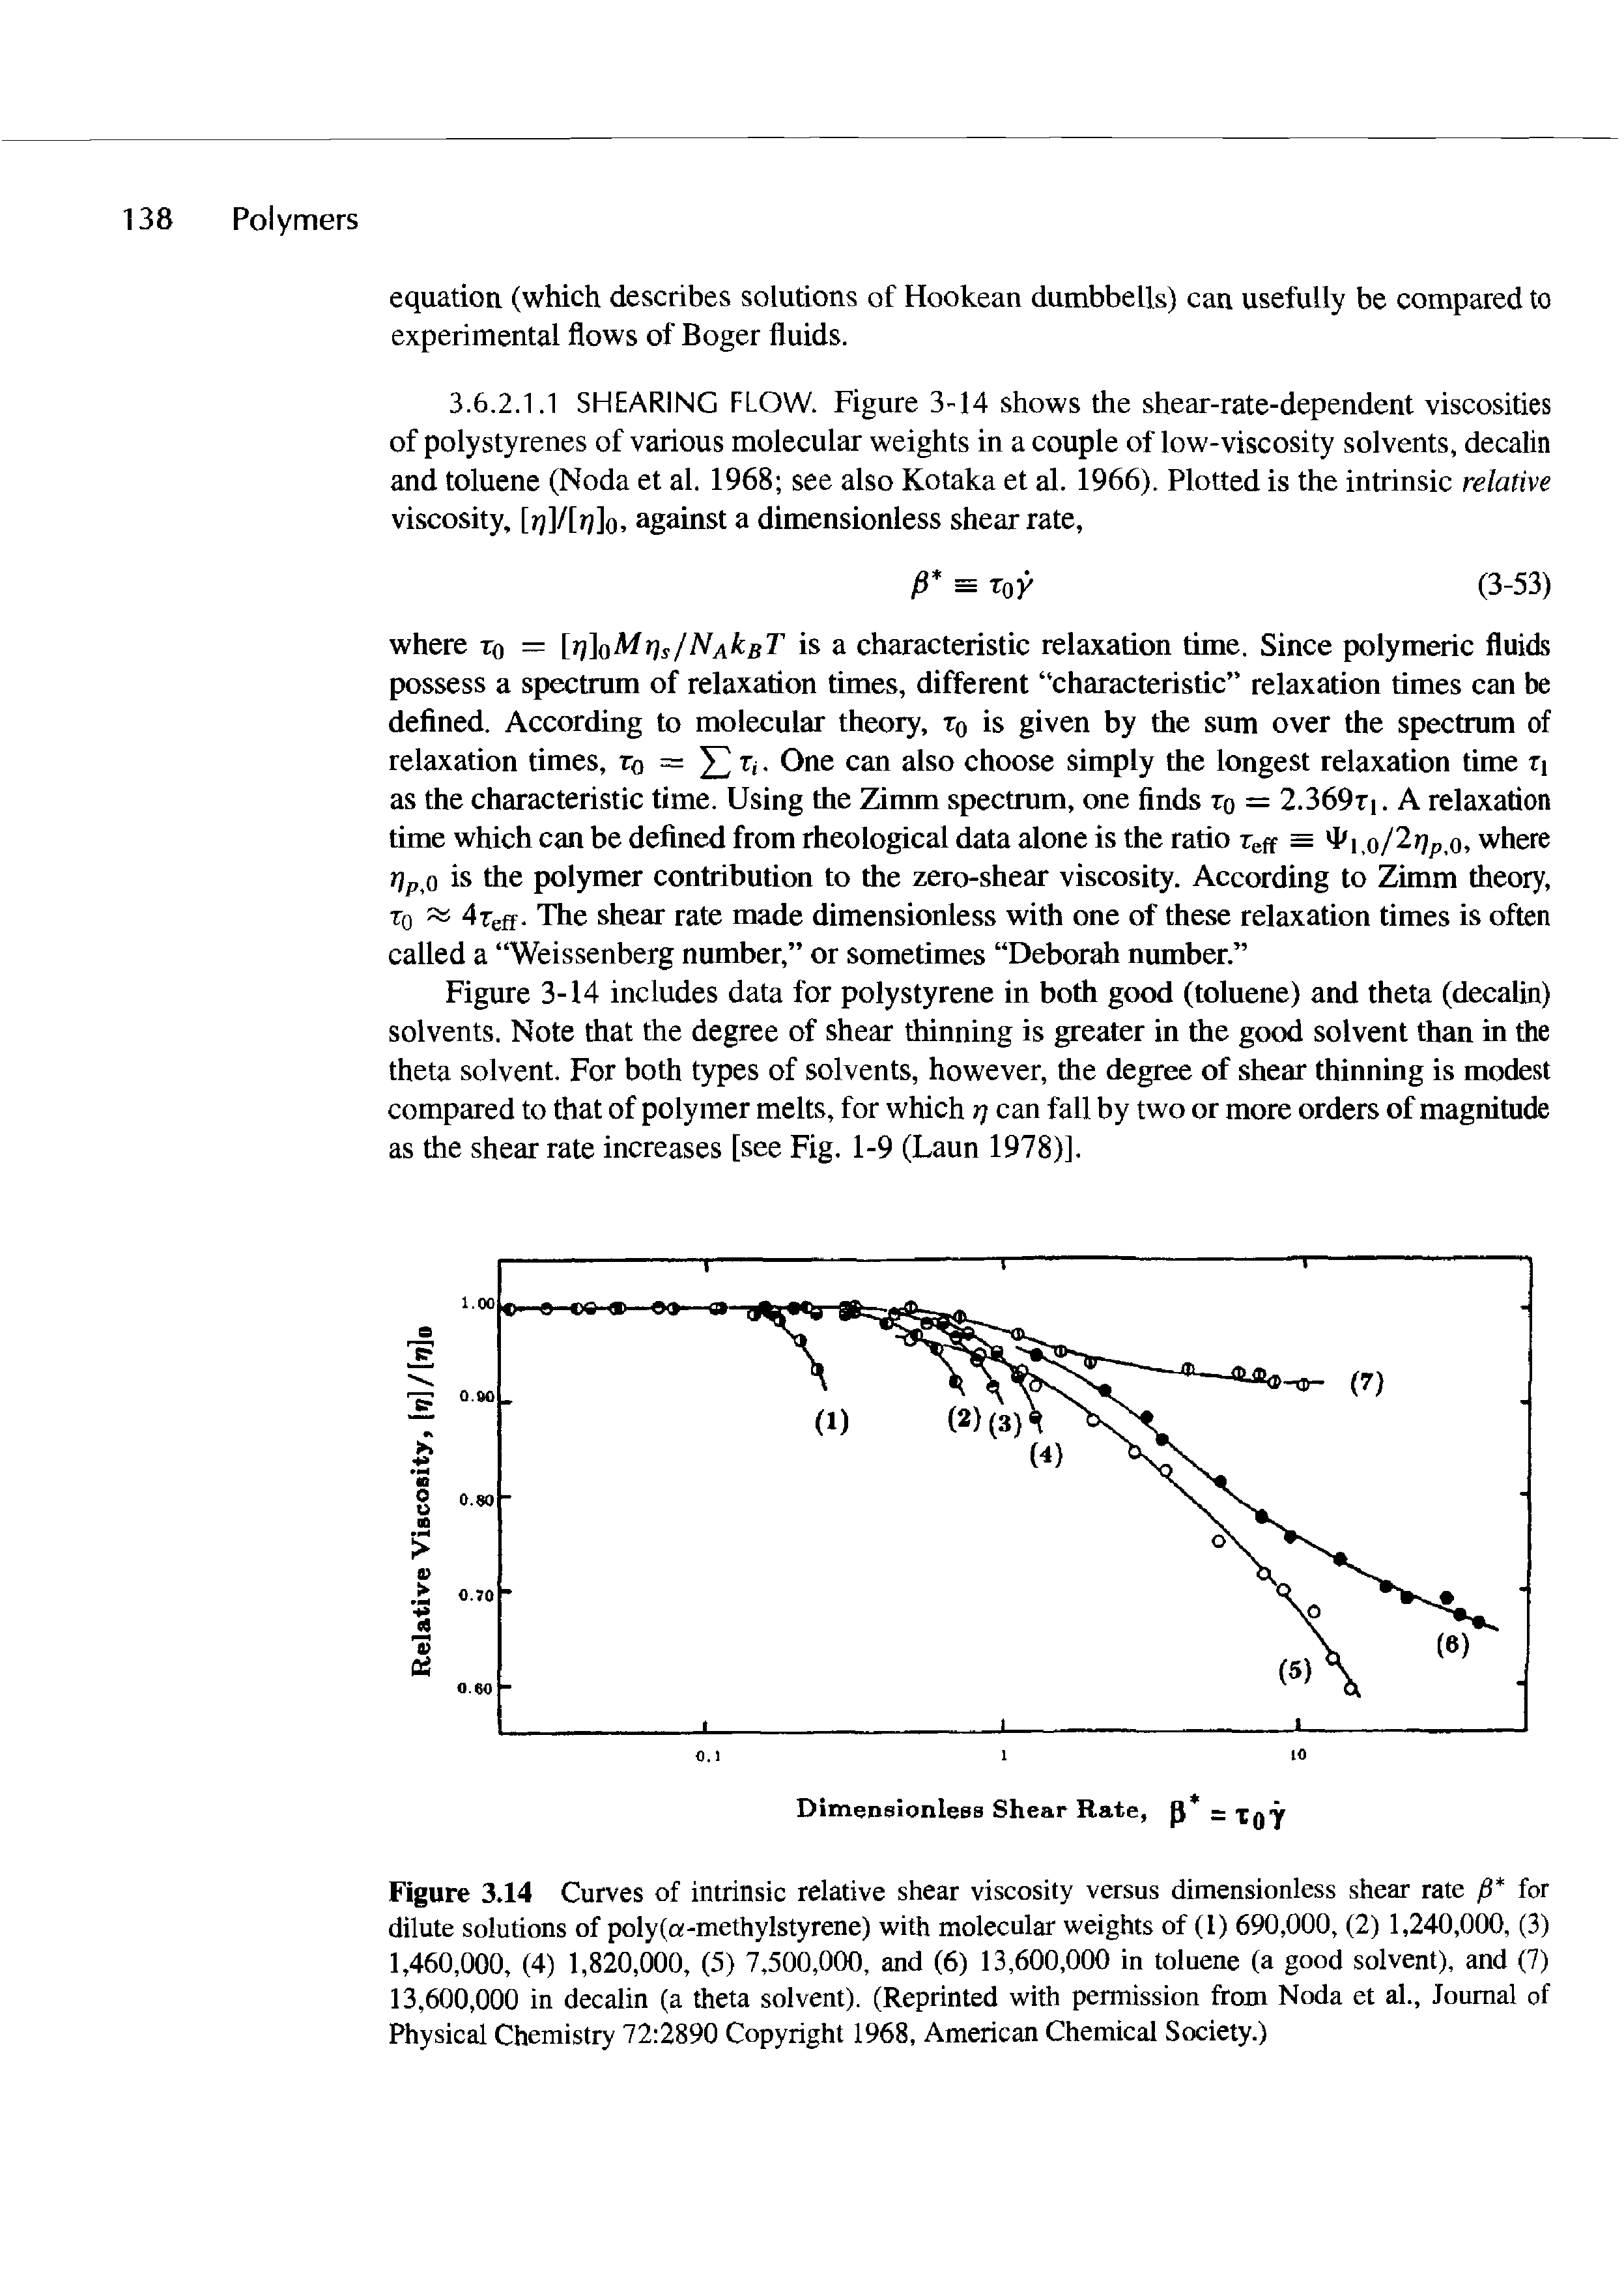 Figure 3.14 Curves of intrinsic relative shear viscosity versus dimensionless shear rate for dilute solutions of poly(a-methylstyrene) with molecular weights of (1) 690,000, (2) 1,240,000, (3) 1,460,000, (4) 1,820,000, (5) 7,500,000, and (6) 13,600,000 in toluene (a good solvent), and (7) 13,600,000 in decalin (a theta solvent). (Reprinted with permission from Noda et al.. Journal of Physical Chemistry 72 2890 Copyright 1968, American Chemical Society.)...